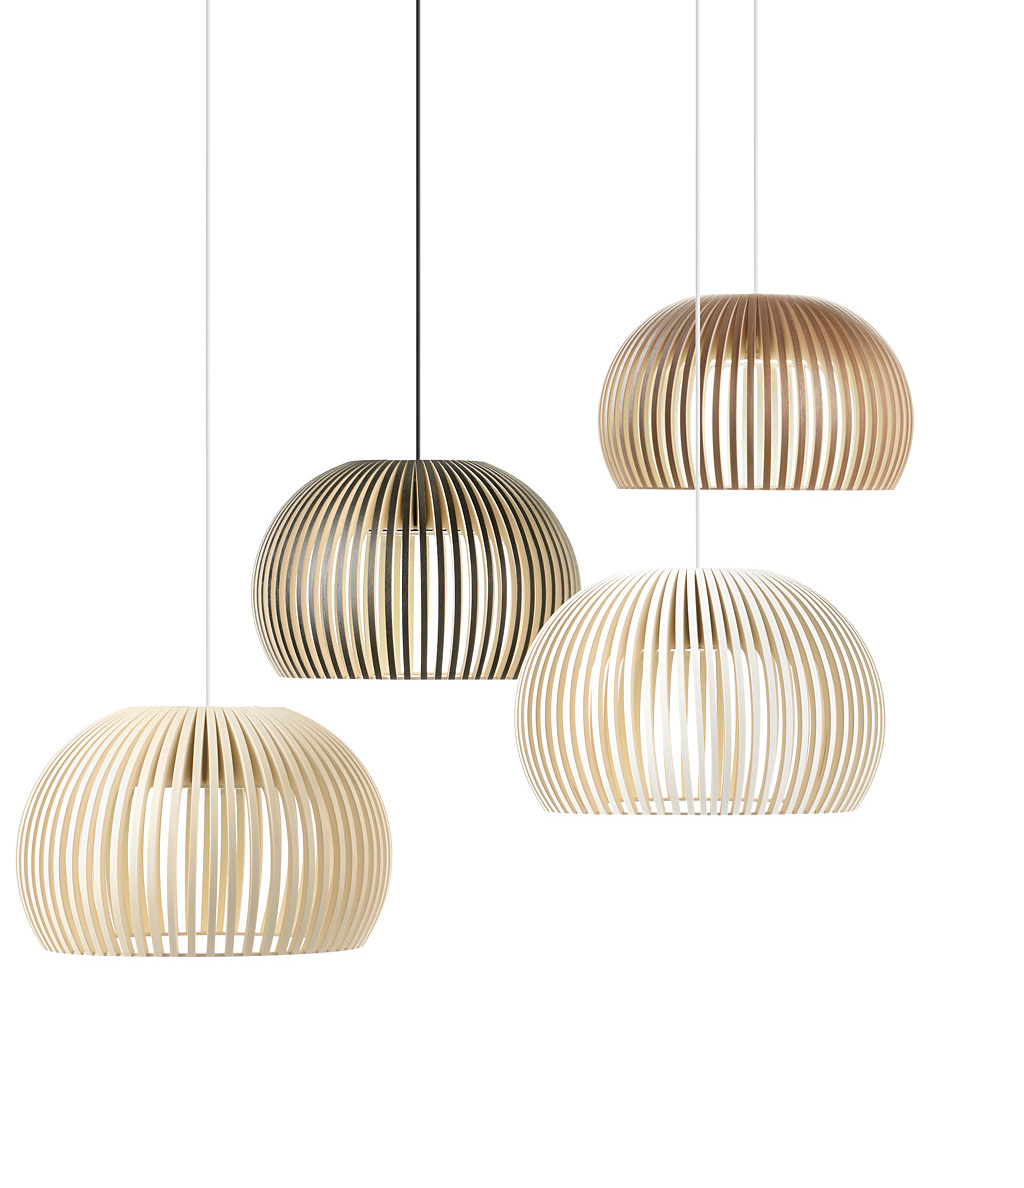 Secto Design Atto 5000 pendant lamp is available in four colours: birch, walnut, black and white.